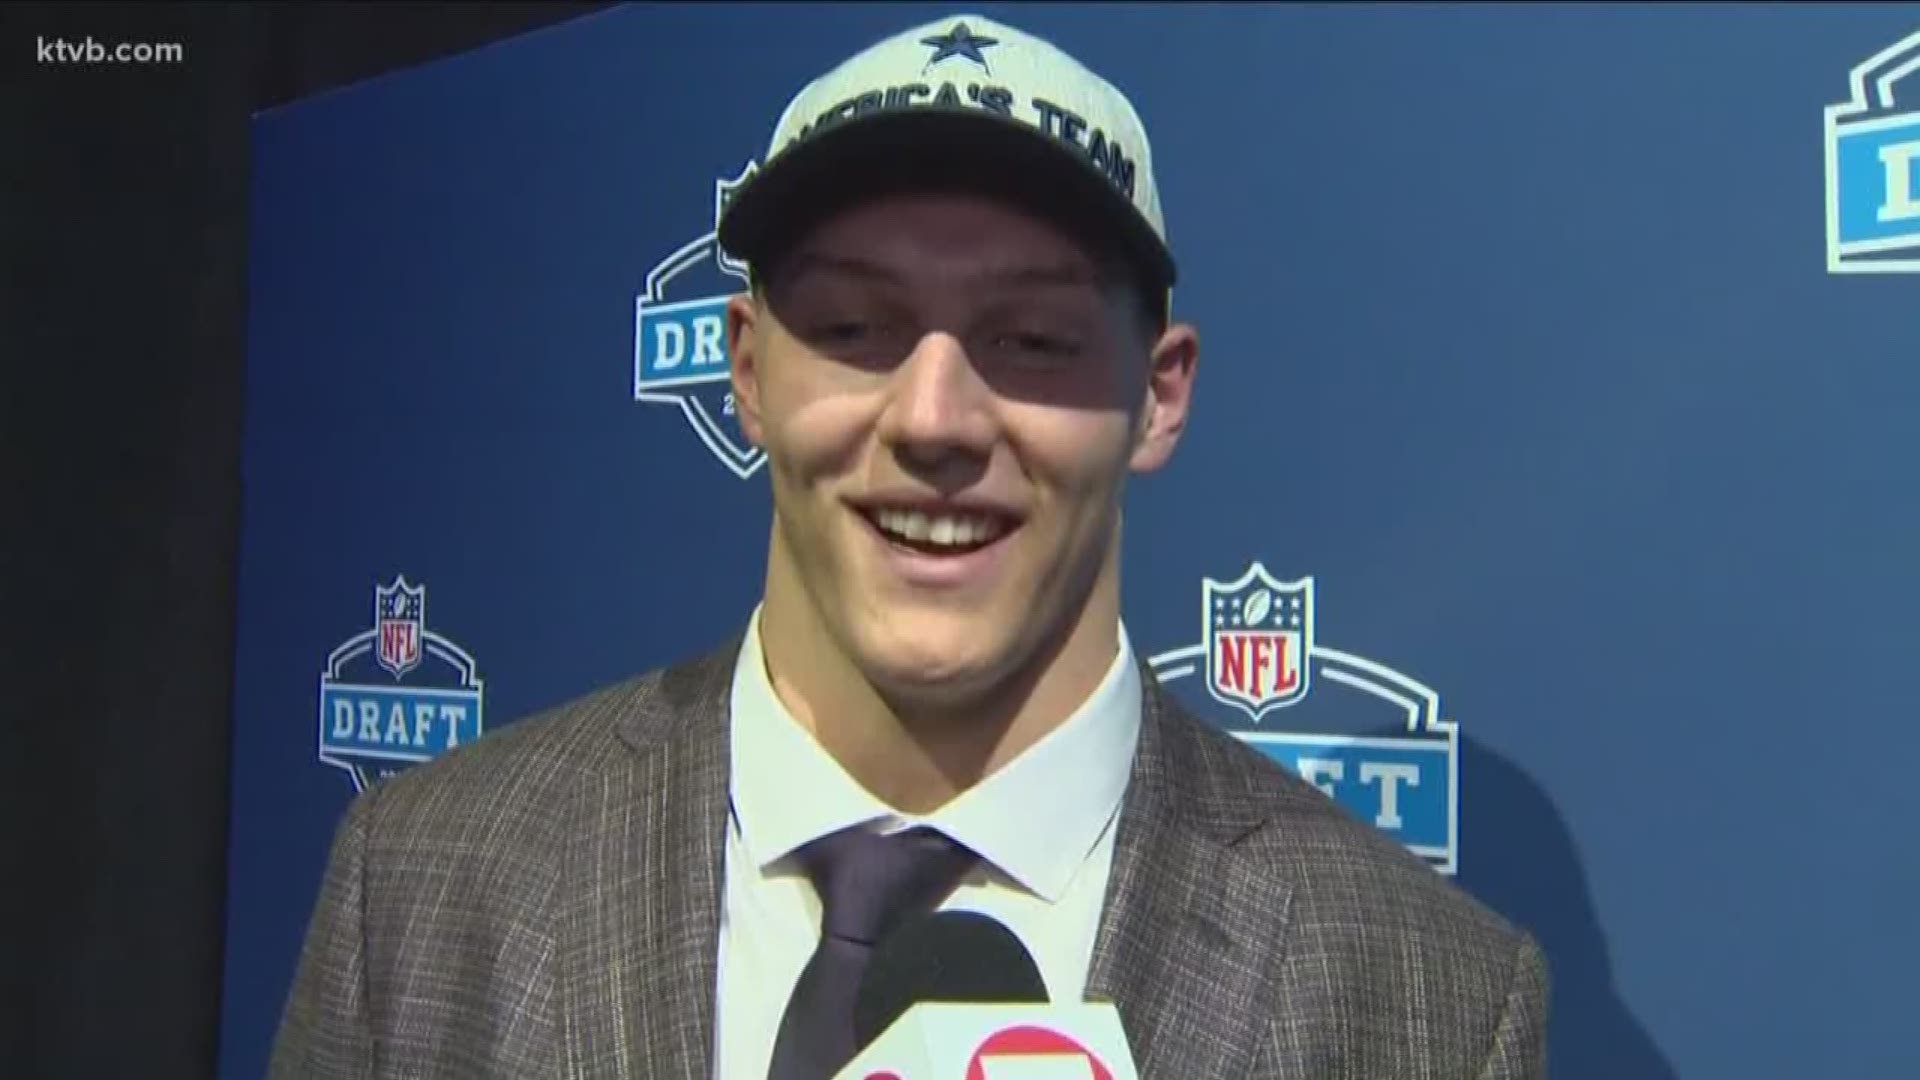 Leighton Vander Esch chats with KTVB Sports Director Jay Tust shortly after he was drafted in the first round by the Dallas Cowboys